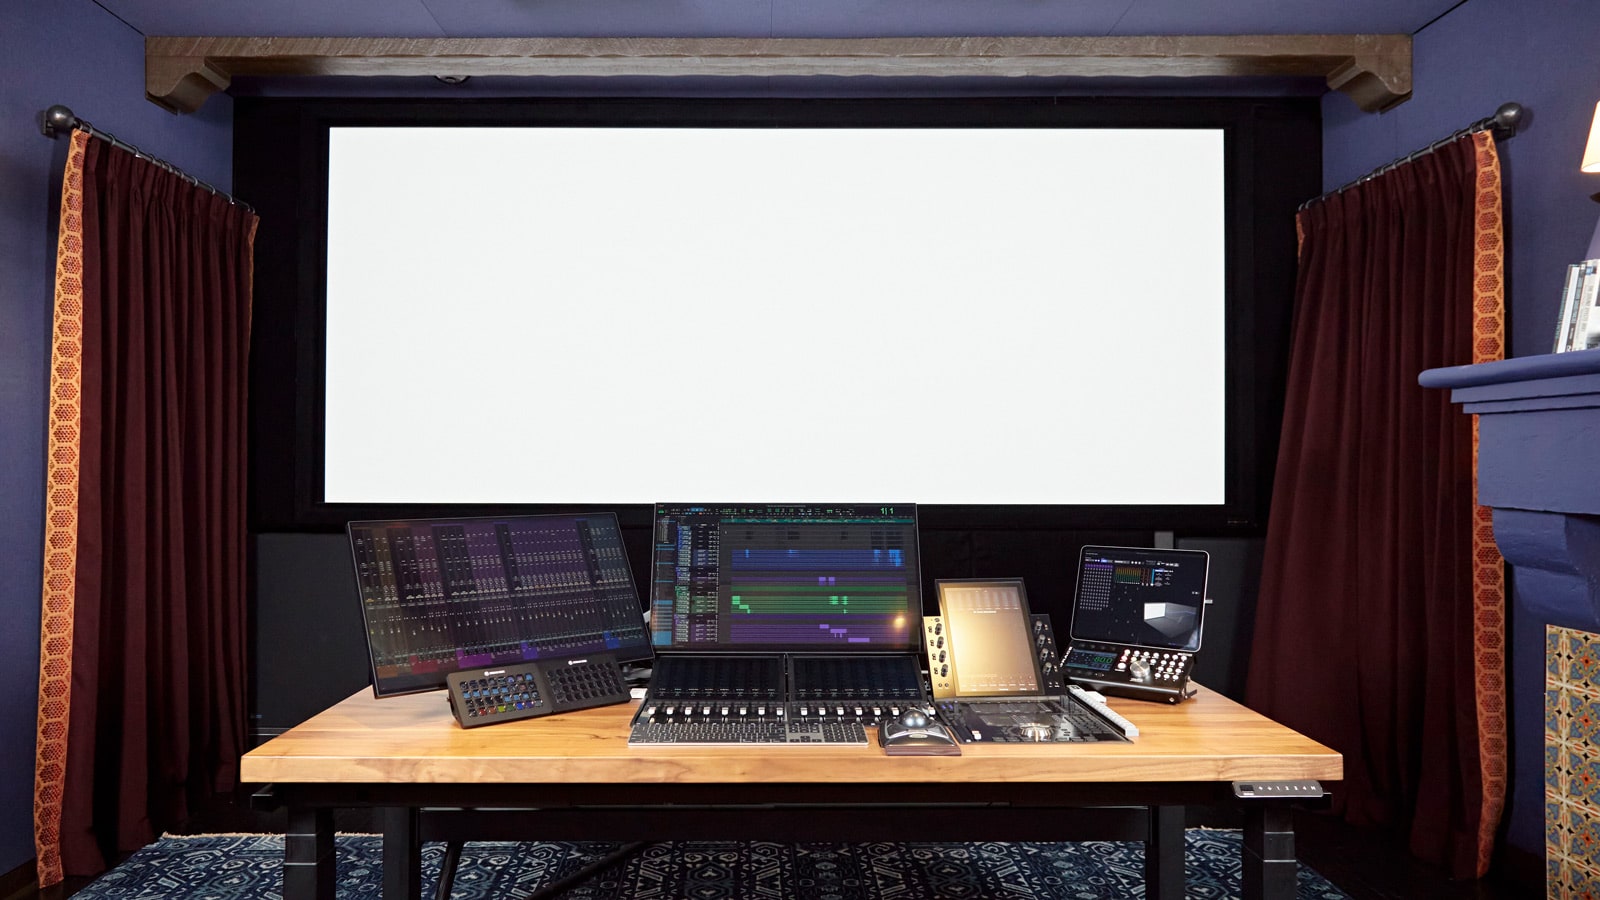 Meyer Sound Bluehorn a ‘Necessary Investment’ For LA Score Mixing Studio